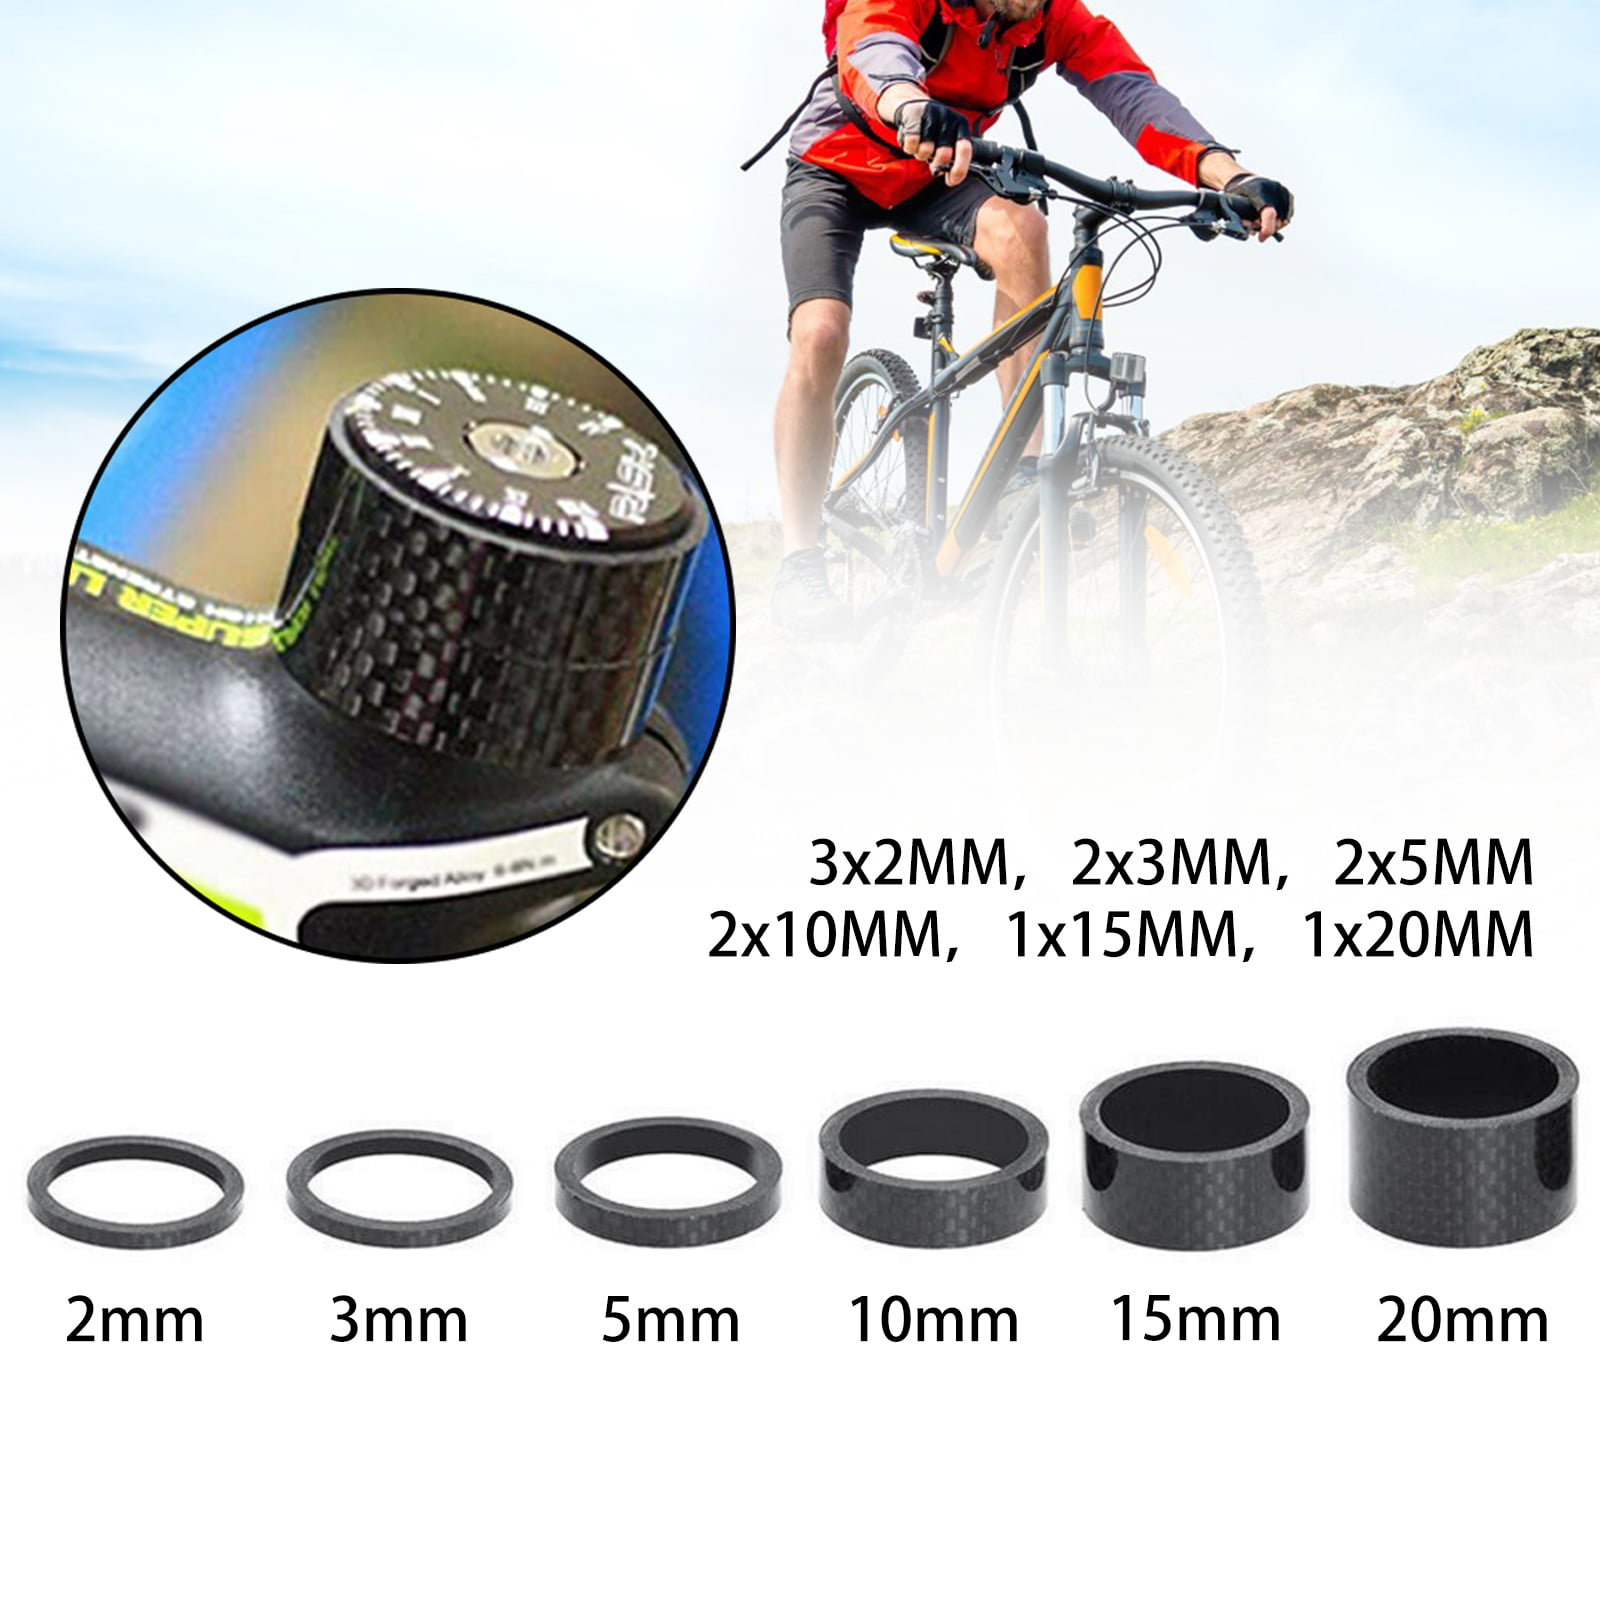 11Pcs Mountain Road Cycling Carbon Fiber Stem Washer Bike Fork Headset Spacers